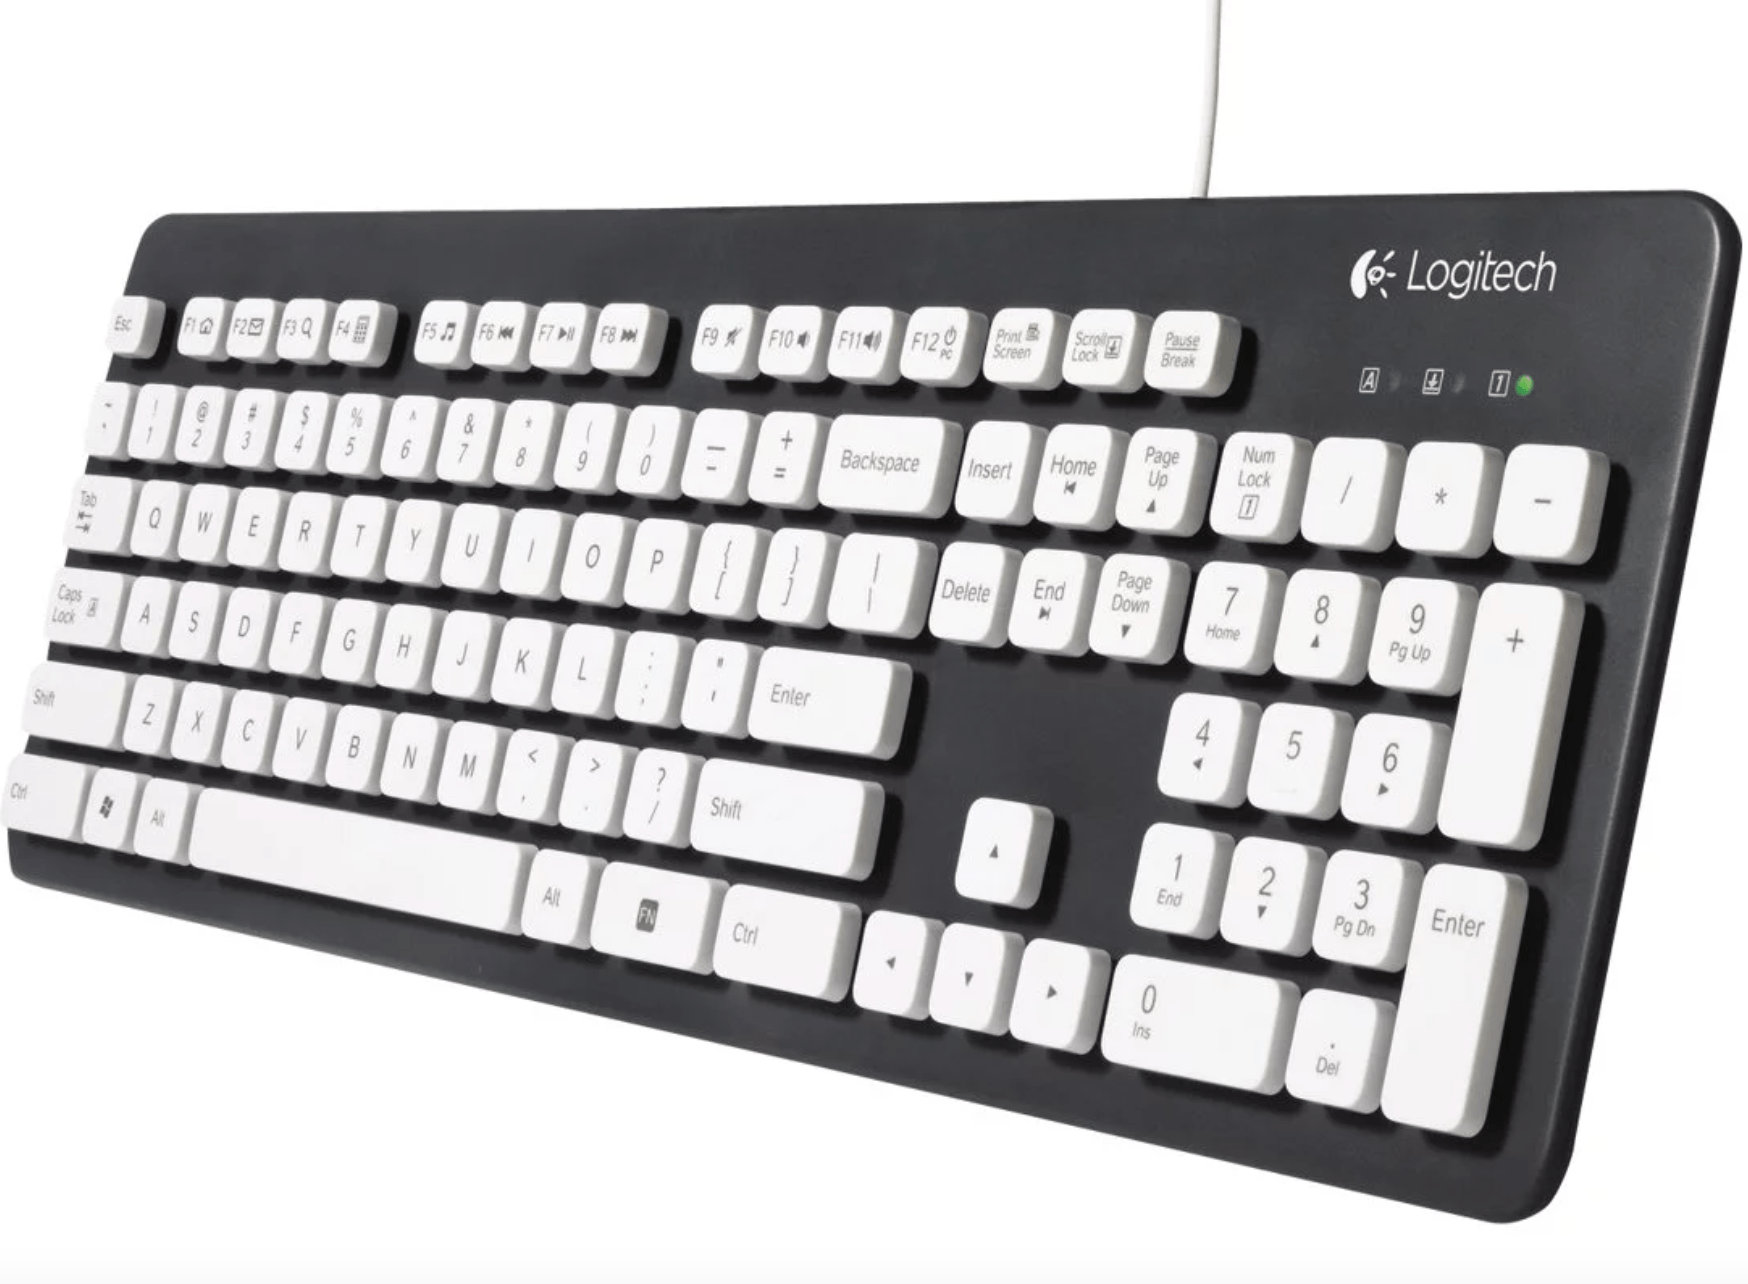 Black and white keyboard by Logitech on a white background.